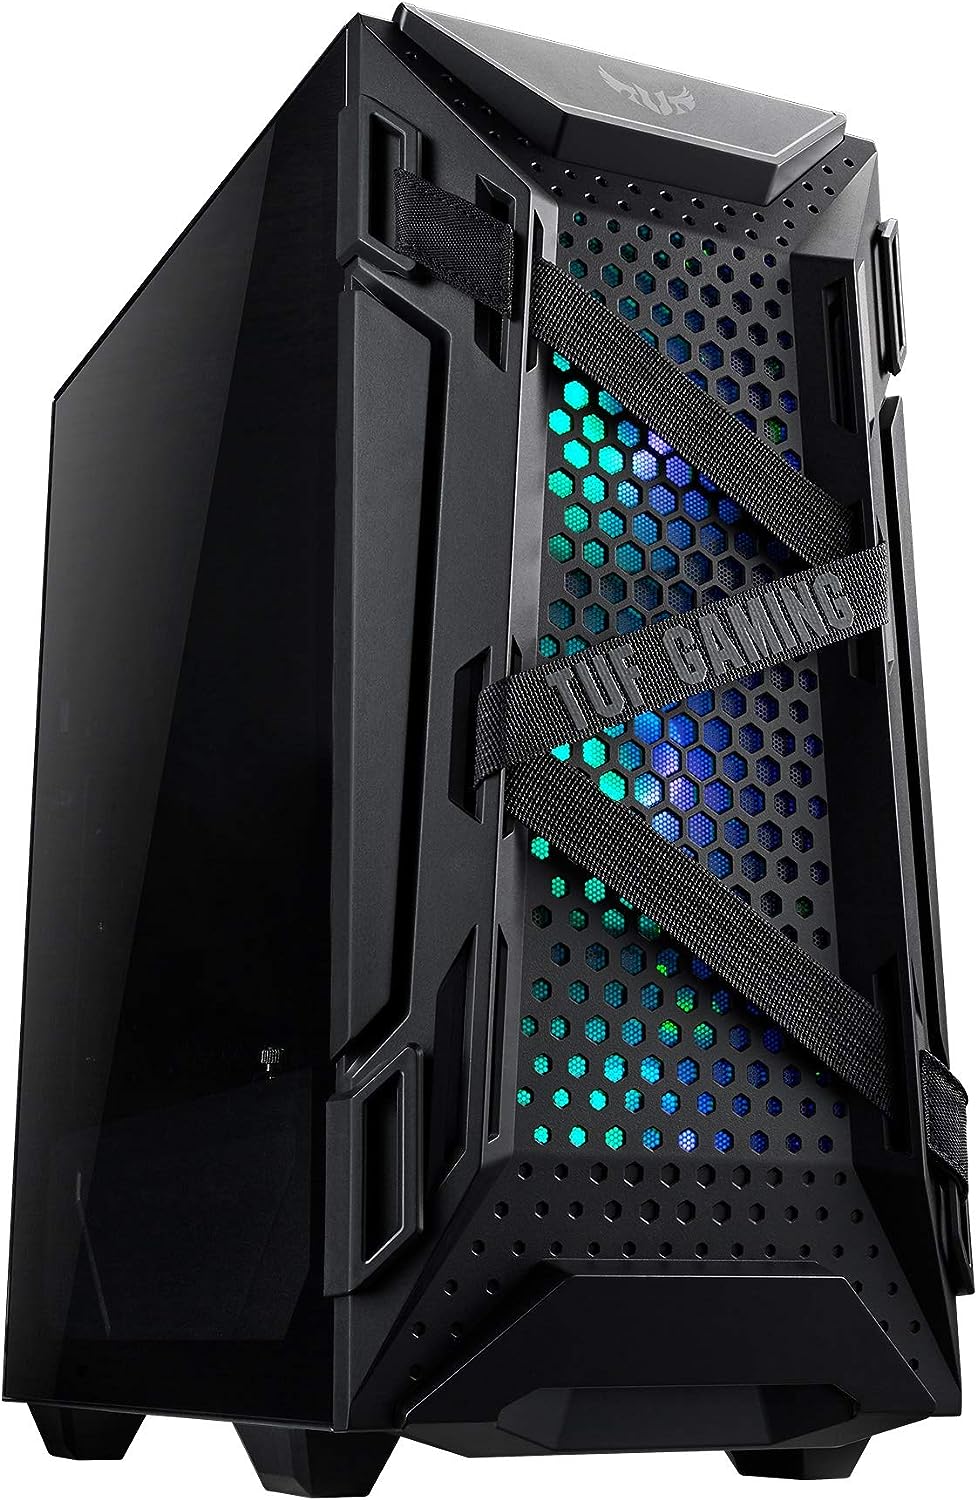 ASUS TUF Gaming GT301 ATX mid-tower tempered glass GAMING CASE